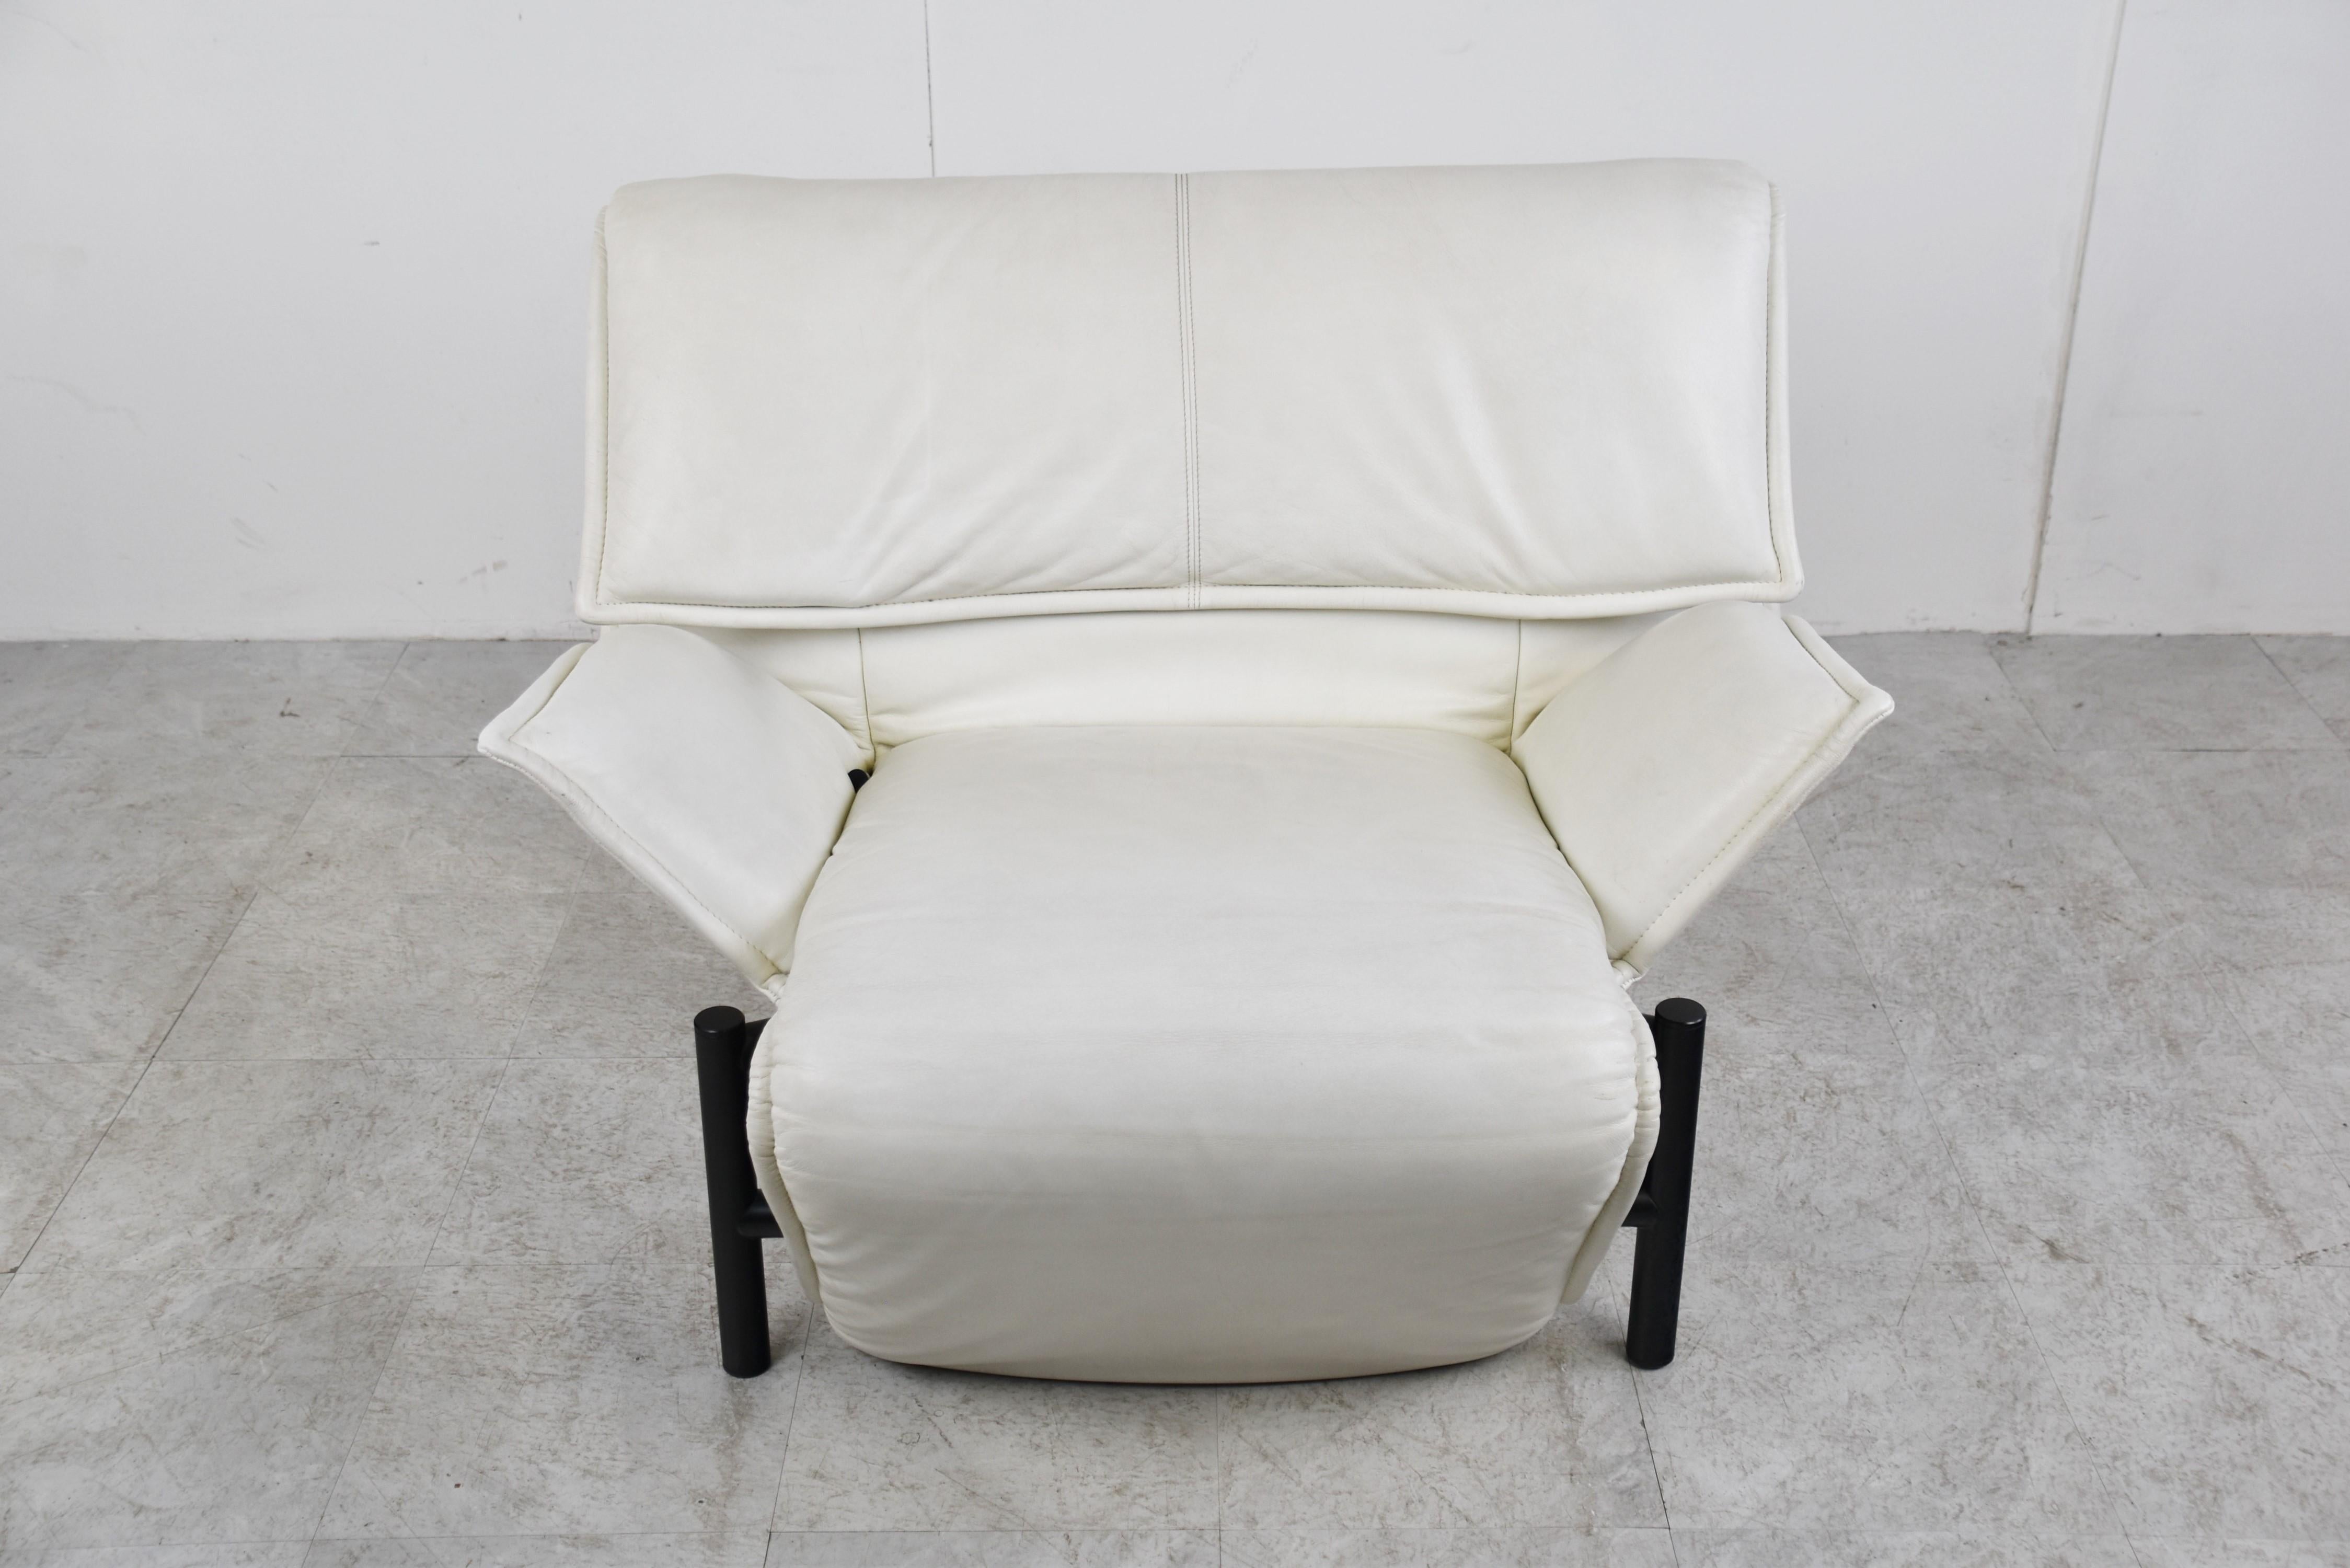 Italian Vintage Leather Veranda Lounge Chair by Vico Magistretti for Cassina, 1980s For Sale